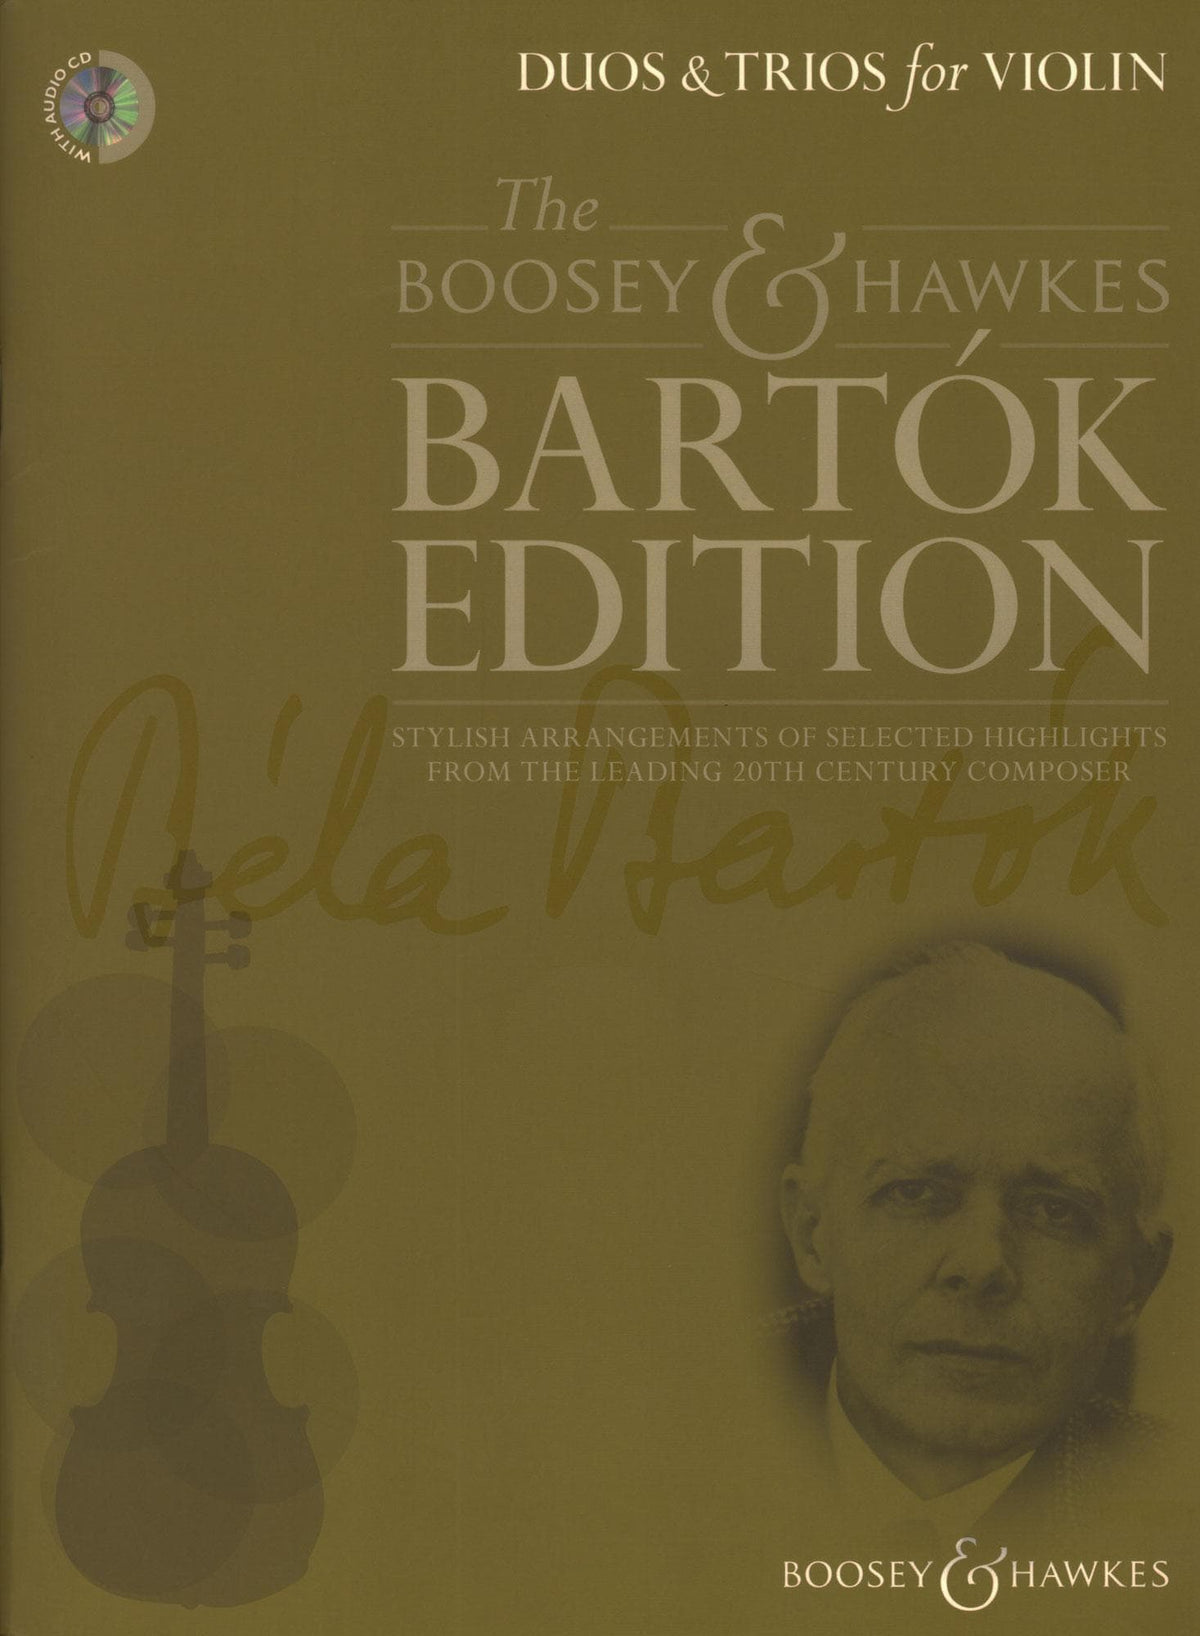 Bartok, Bela - Duos and Trios for Violin - for two or three Violins - 21 Stylish Arrangements by Hywel Davies - Boosey & Hawkes